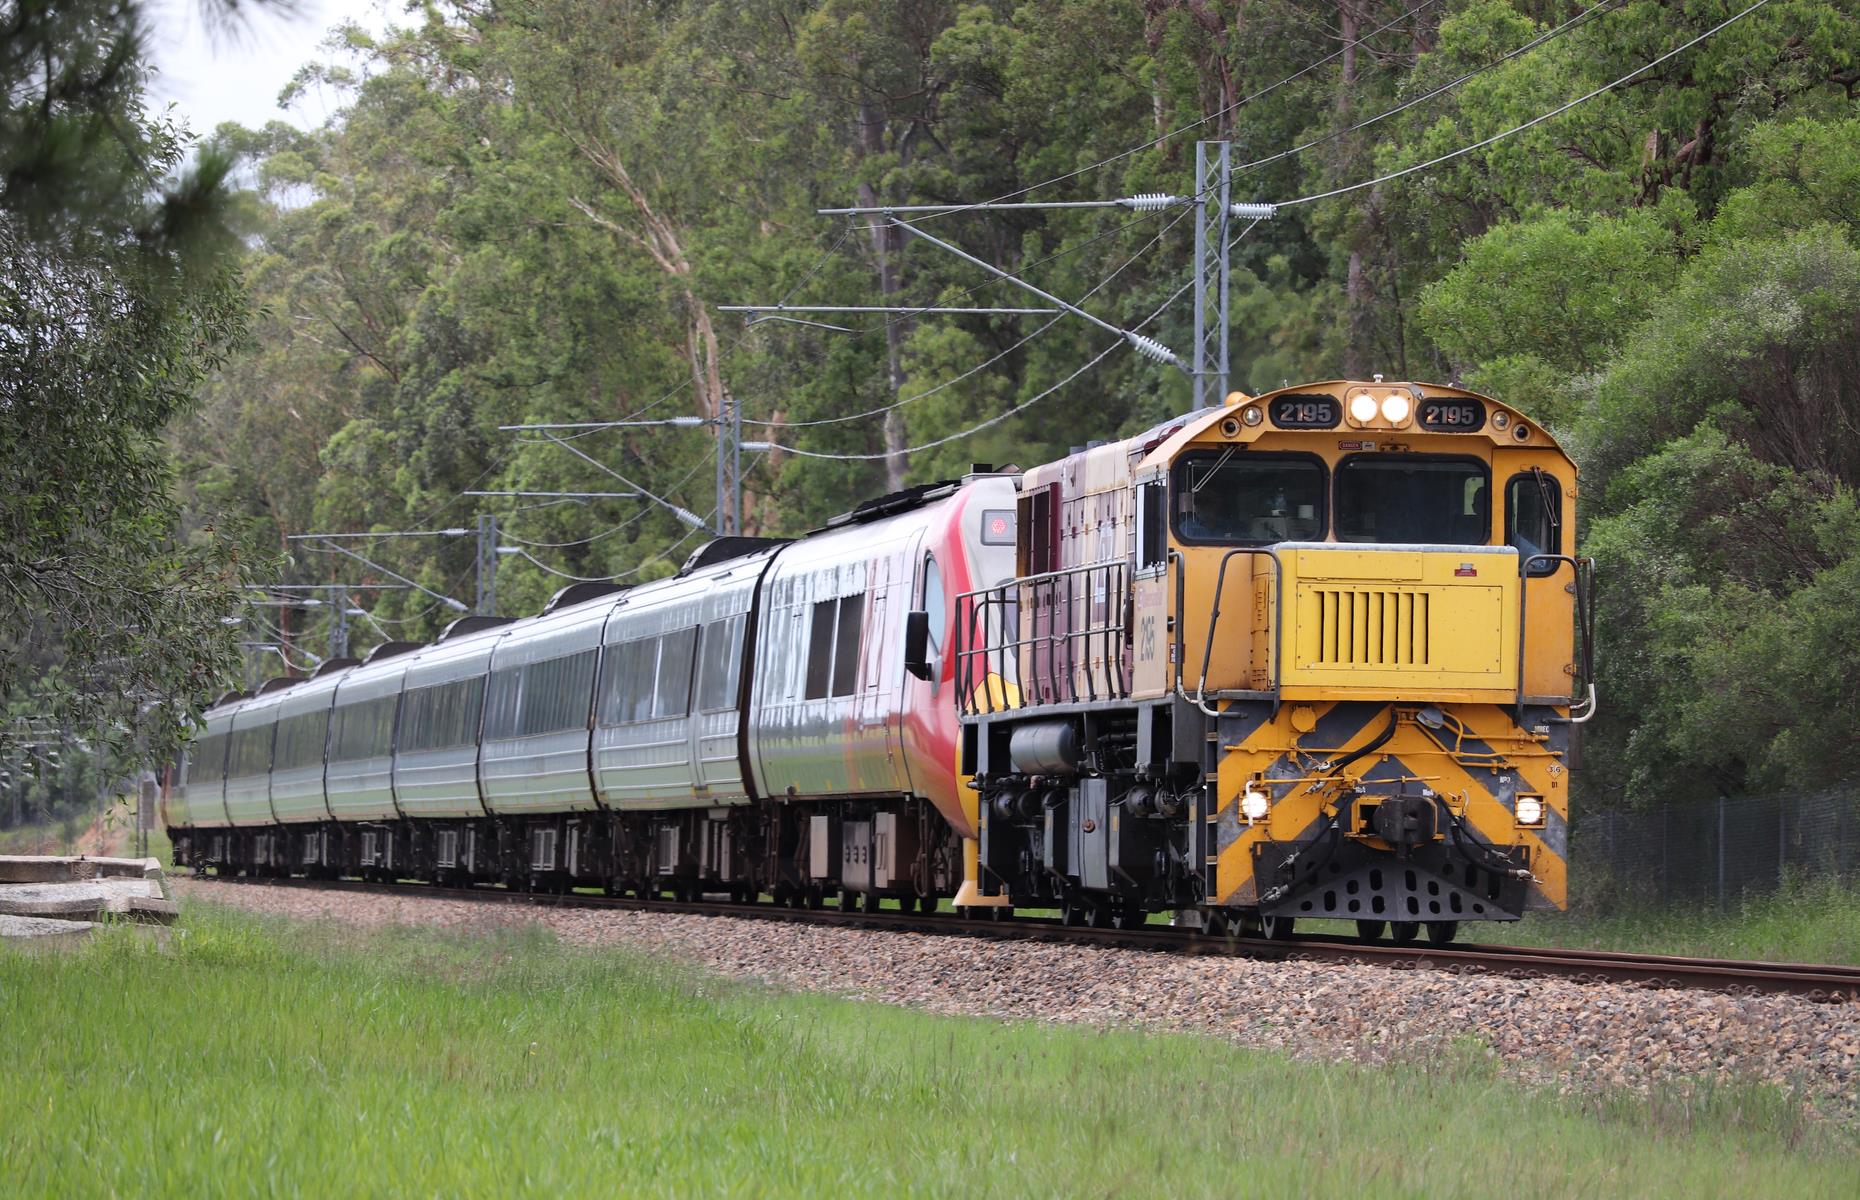 <p>Replacing the much-loved Sunlander in 2014, the Spirit of Queensland travels 1,044 miles (1,681km) over 25 hours, connecting Brisbane and Cairns. The long-distance rail service passes through gorgeous tropical landscapes and connects passengers with coastal Queensland's spectacular destinations including hop-off points to explore the Great Barrier Reef and the Whitsundays. </p>